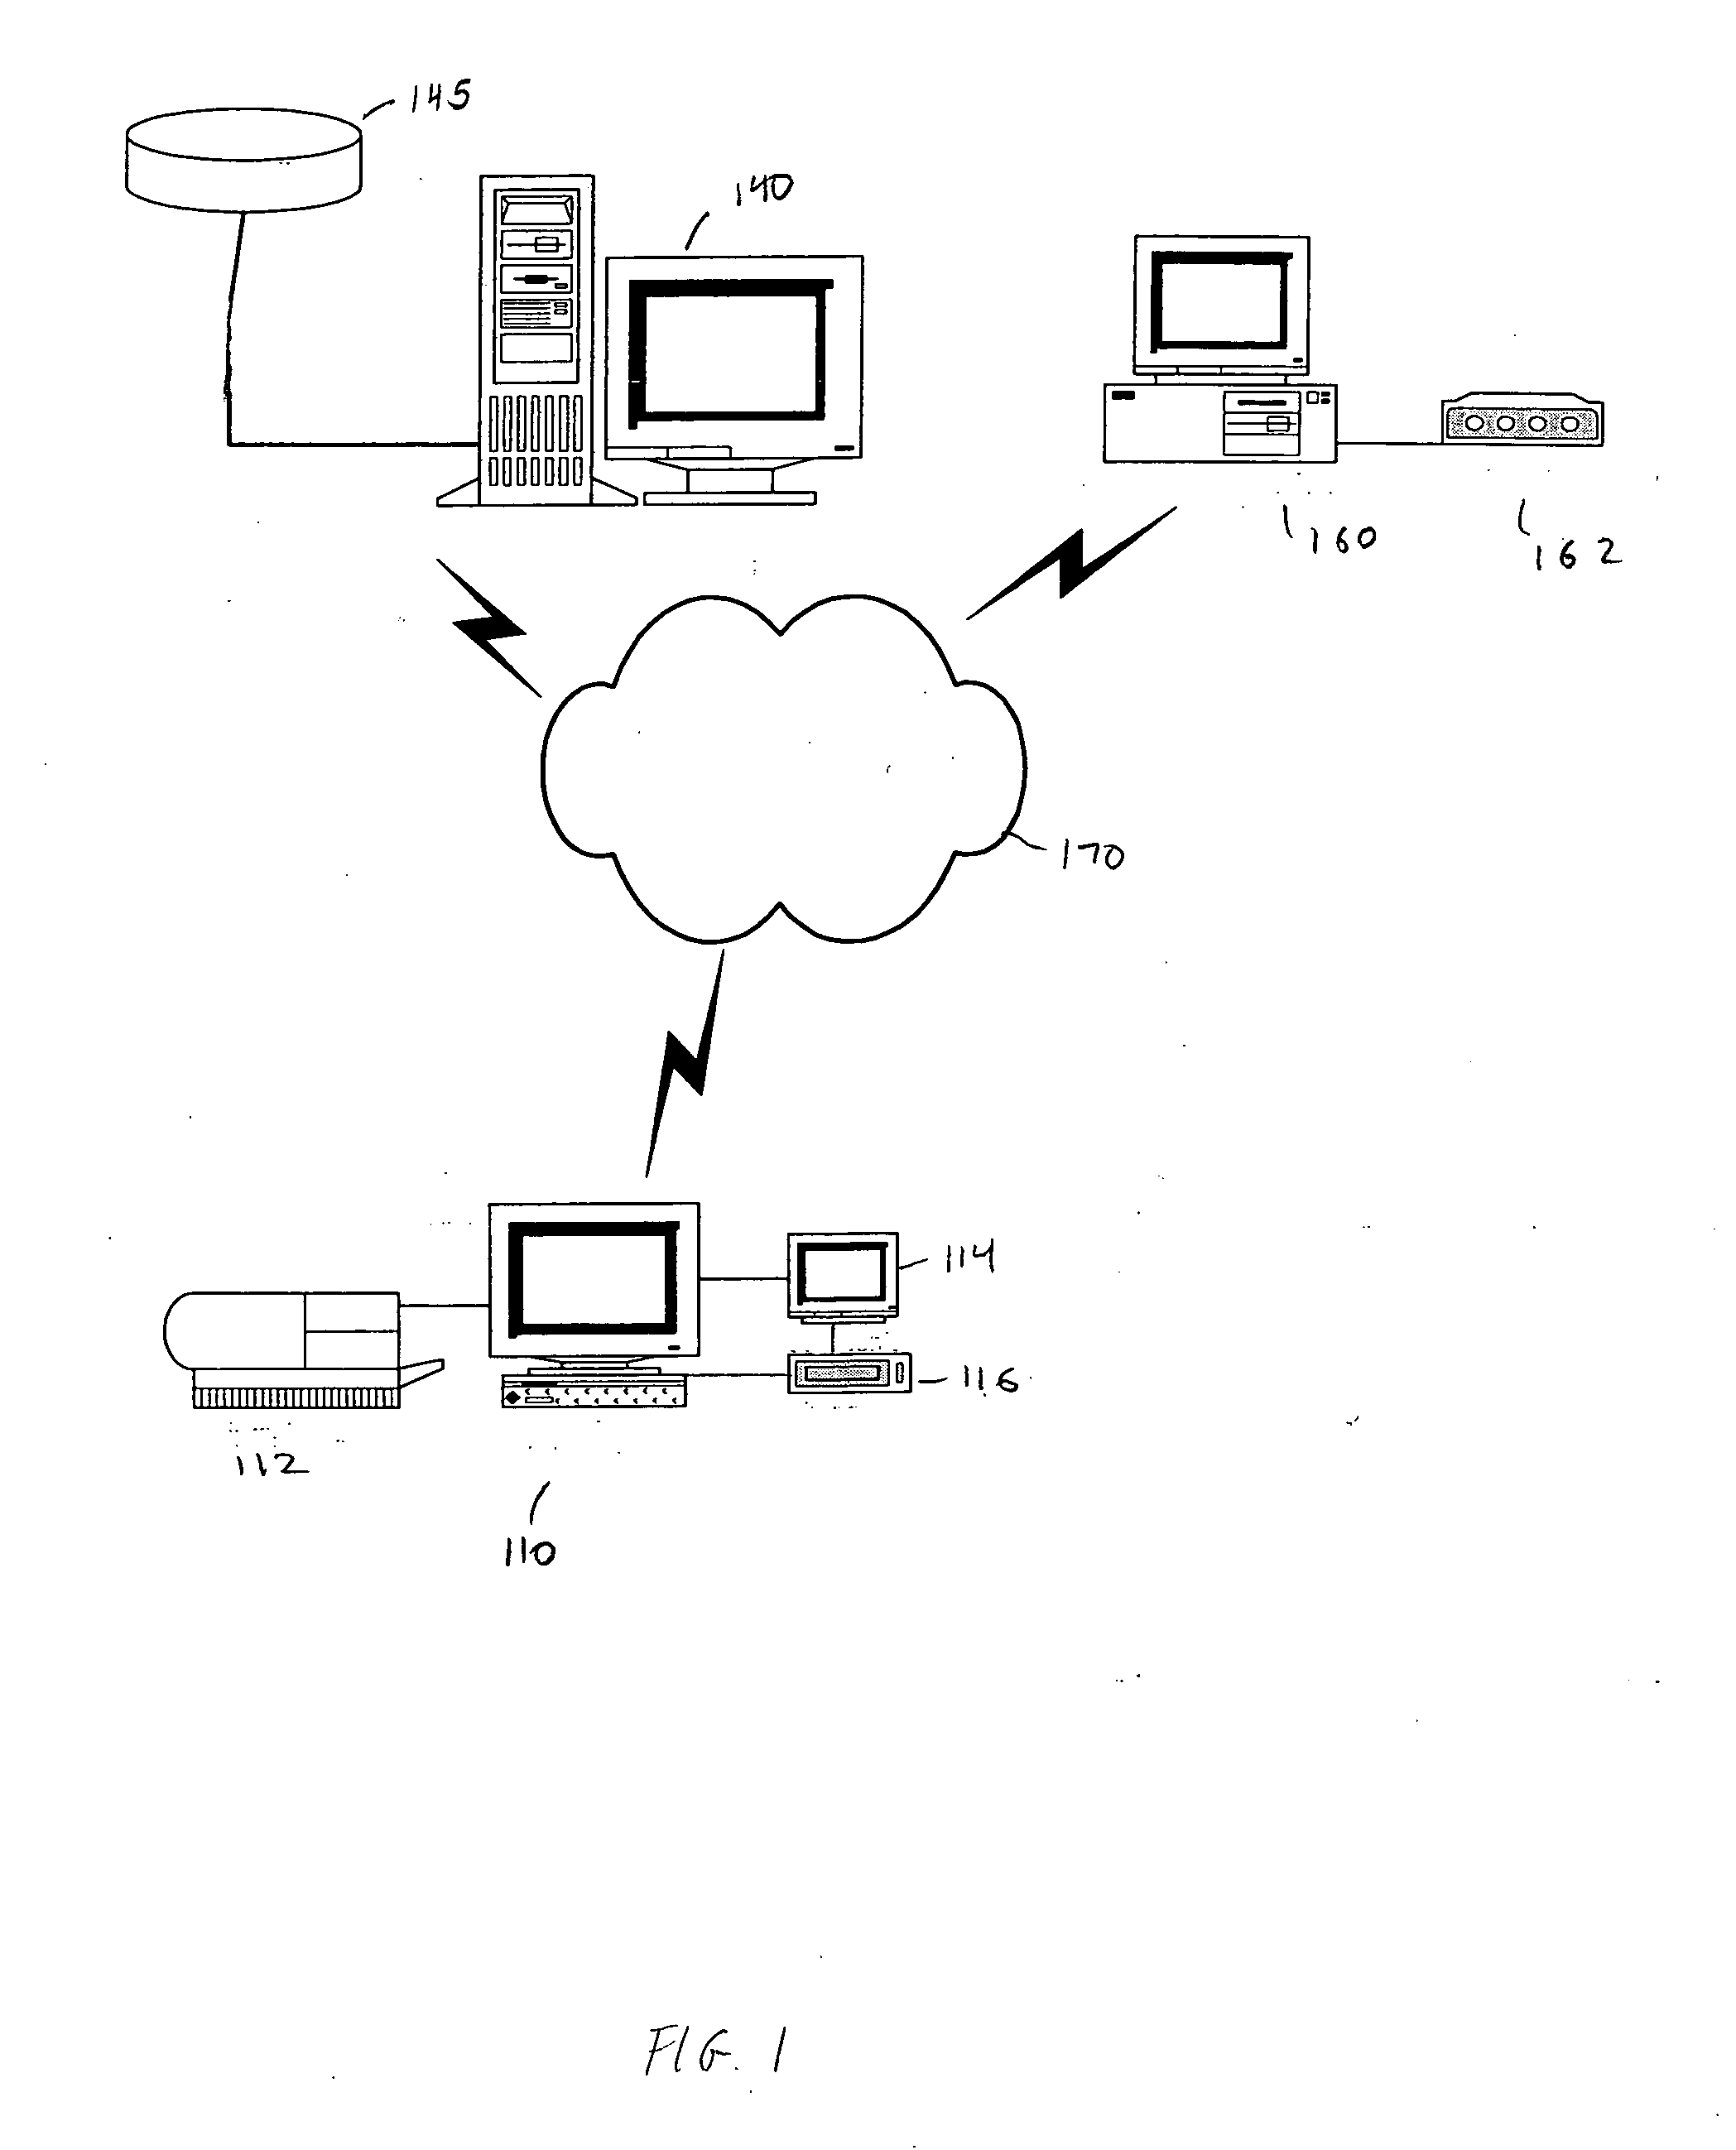 System and method for generating a report using a knowledge base